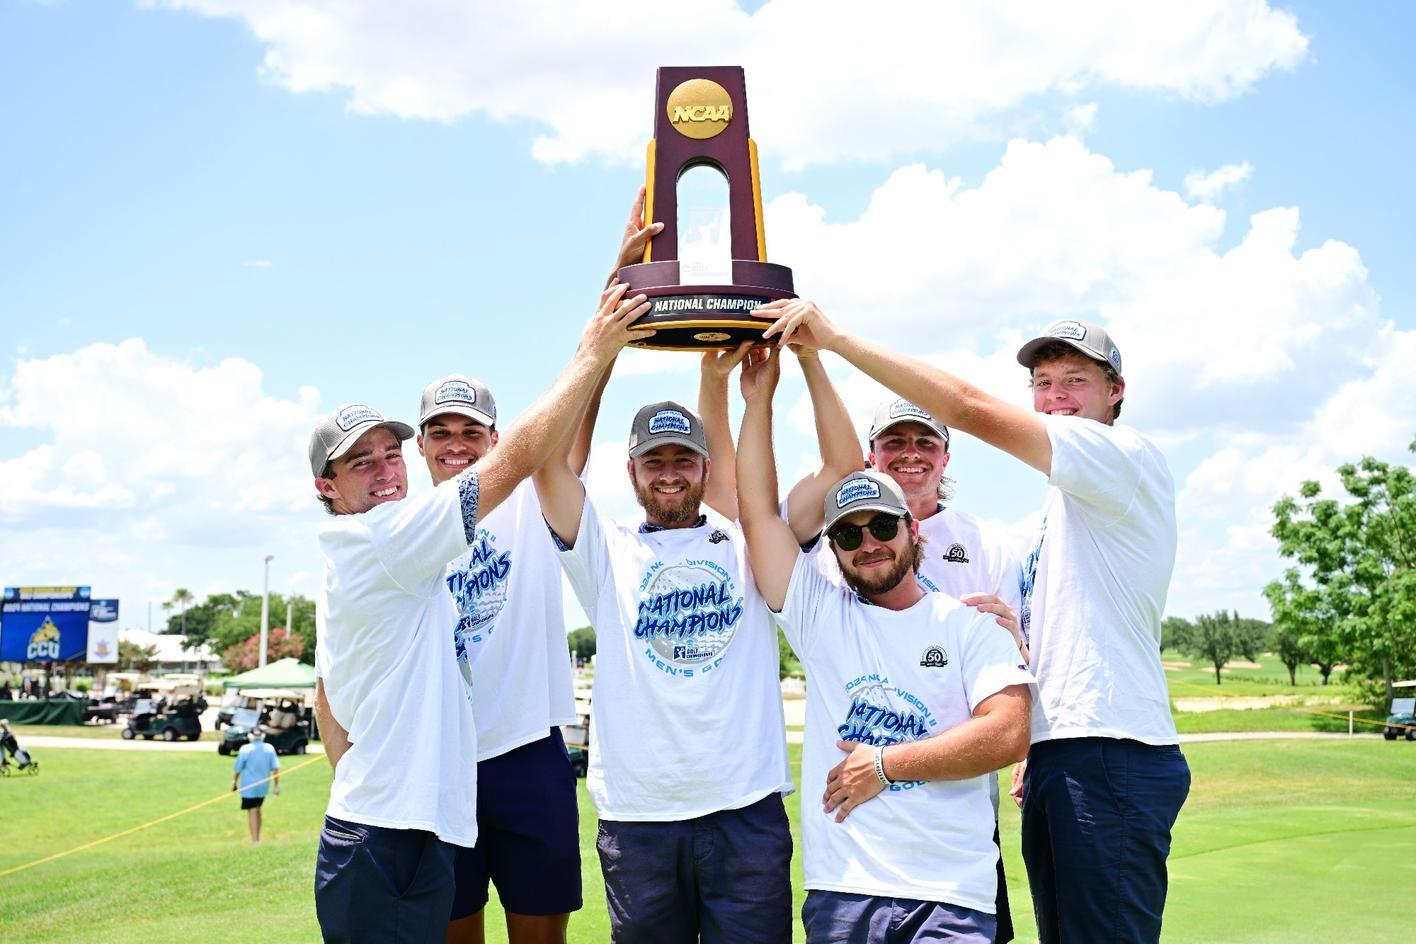 We all love golf, but that’s not the end for us,” said Xavier Bighause, a CCU junior on the team. “We know that it doesn’t mean much if we can’t glorify the Lord doing it.”  